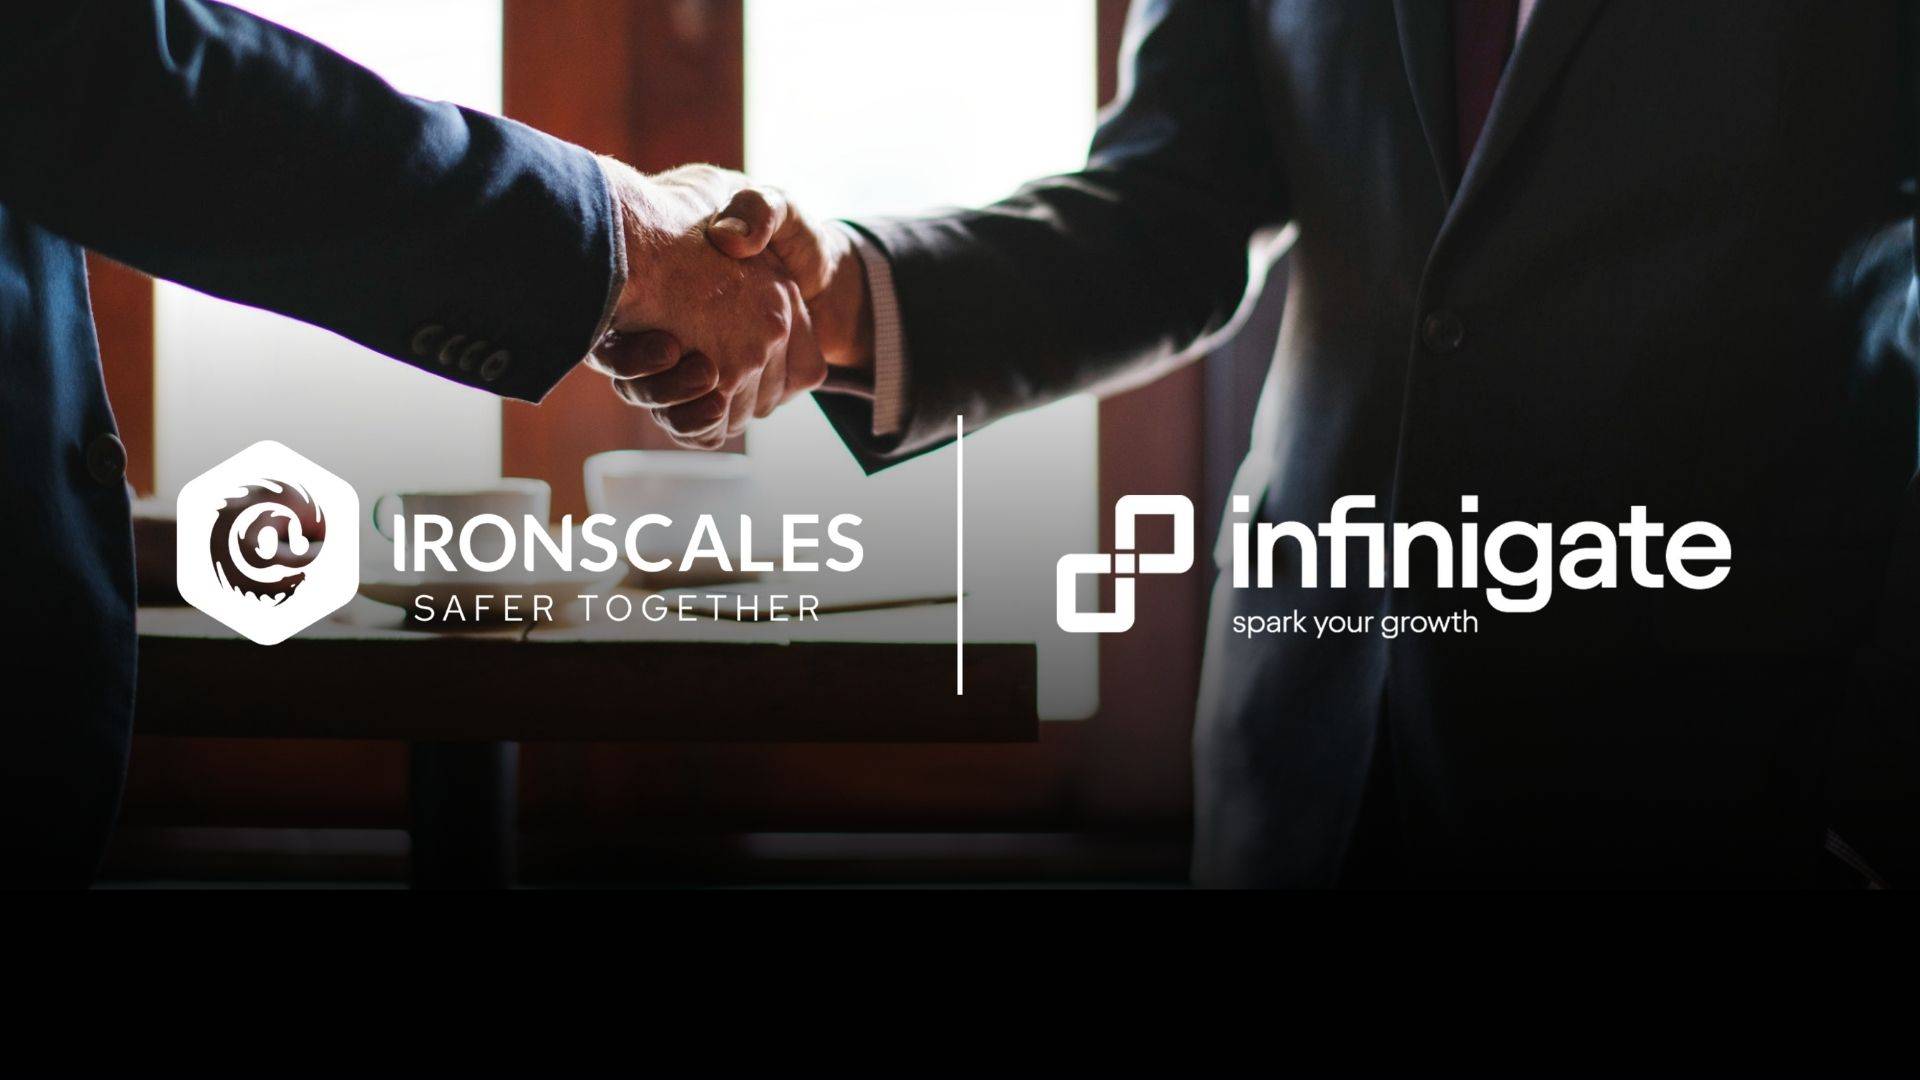 IRONSCALES Expands Partnership with Infinigate to UK and Ireland for Advanced Email Security